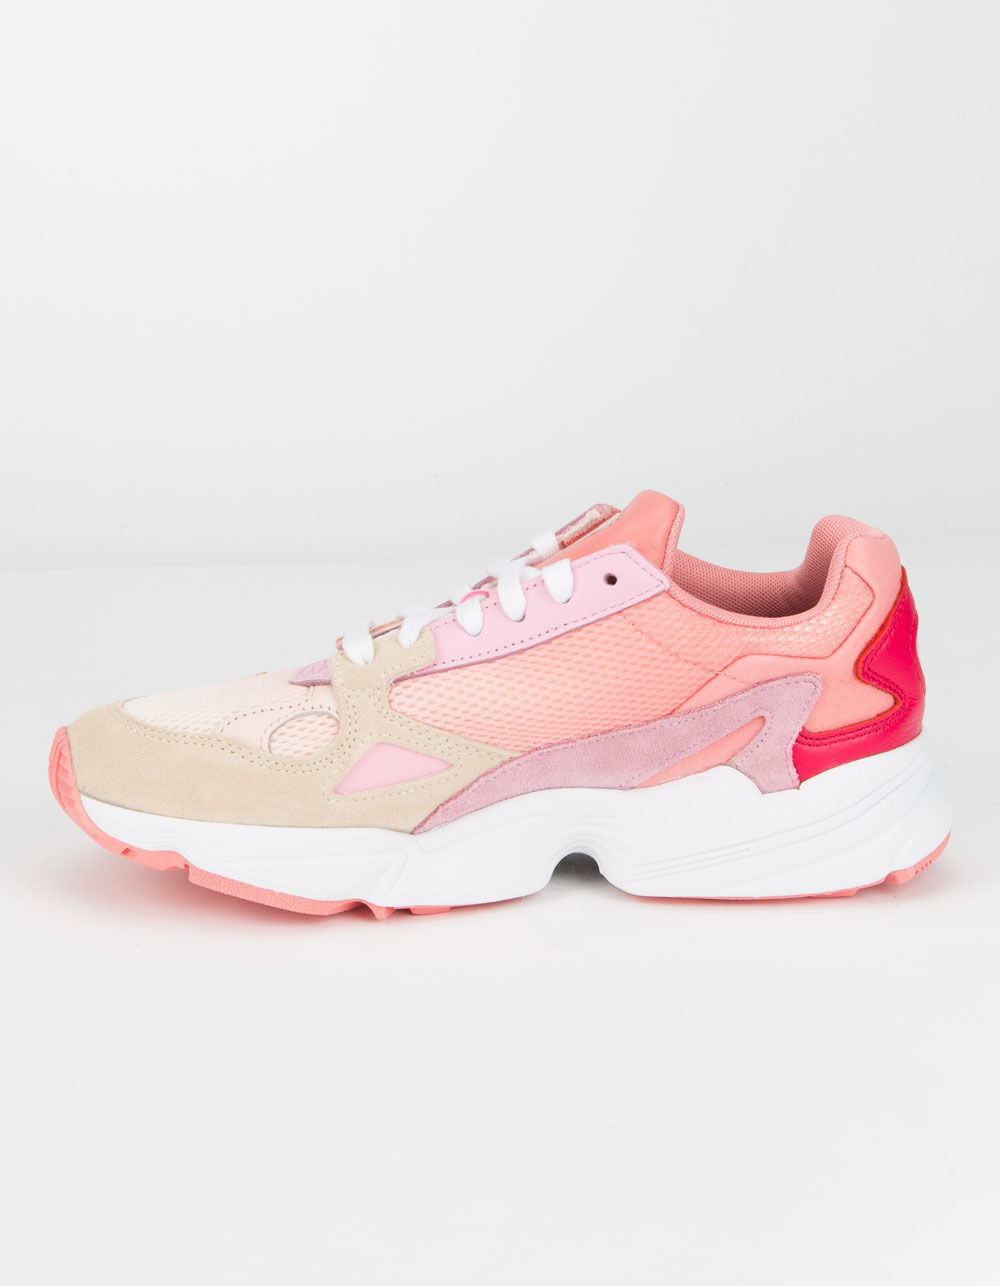 ADIDAS Falcon Ecru Tint & Icey Pink Womens Shoes image number 3